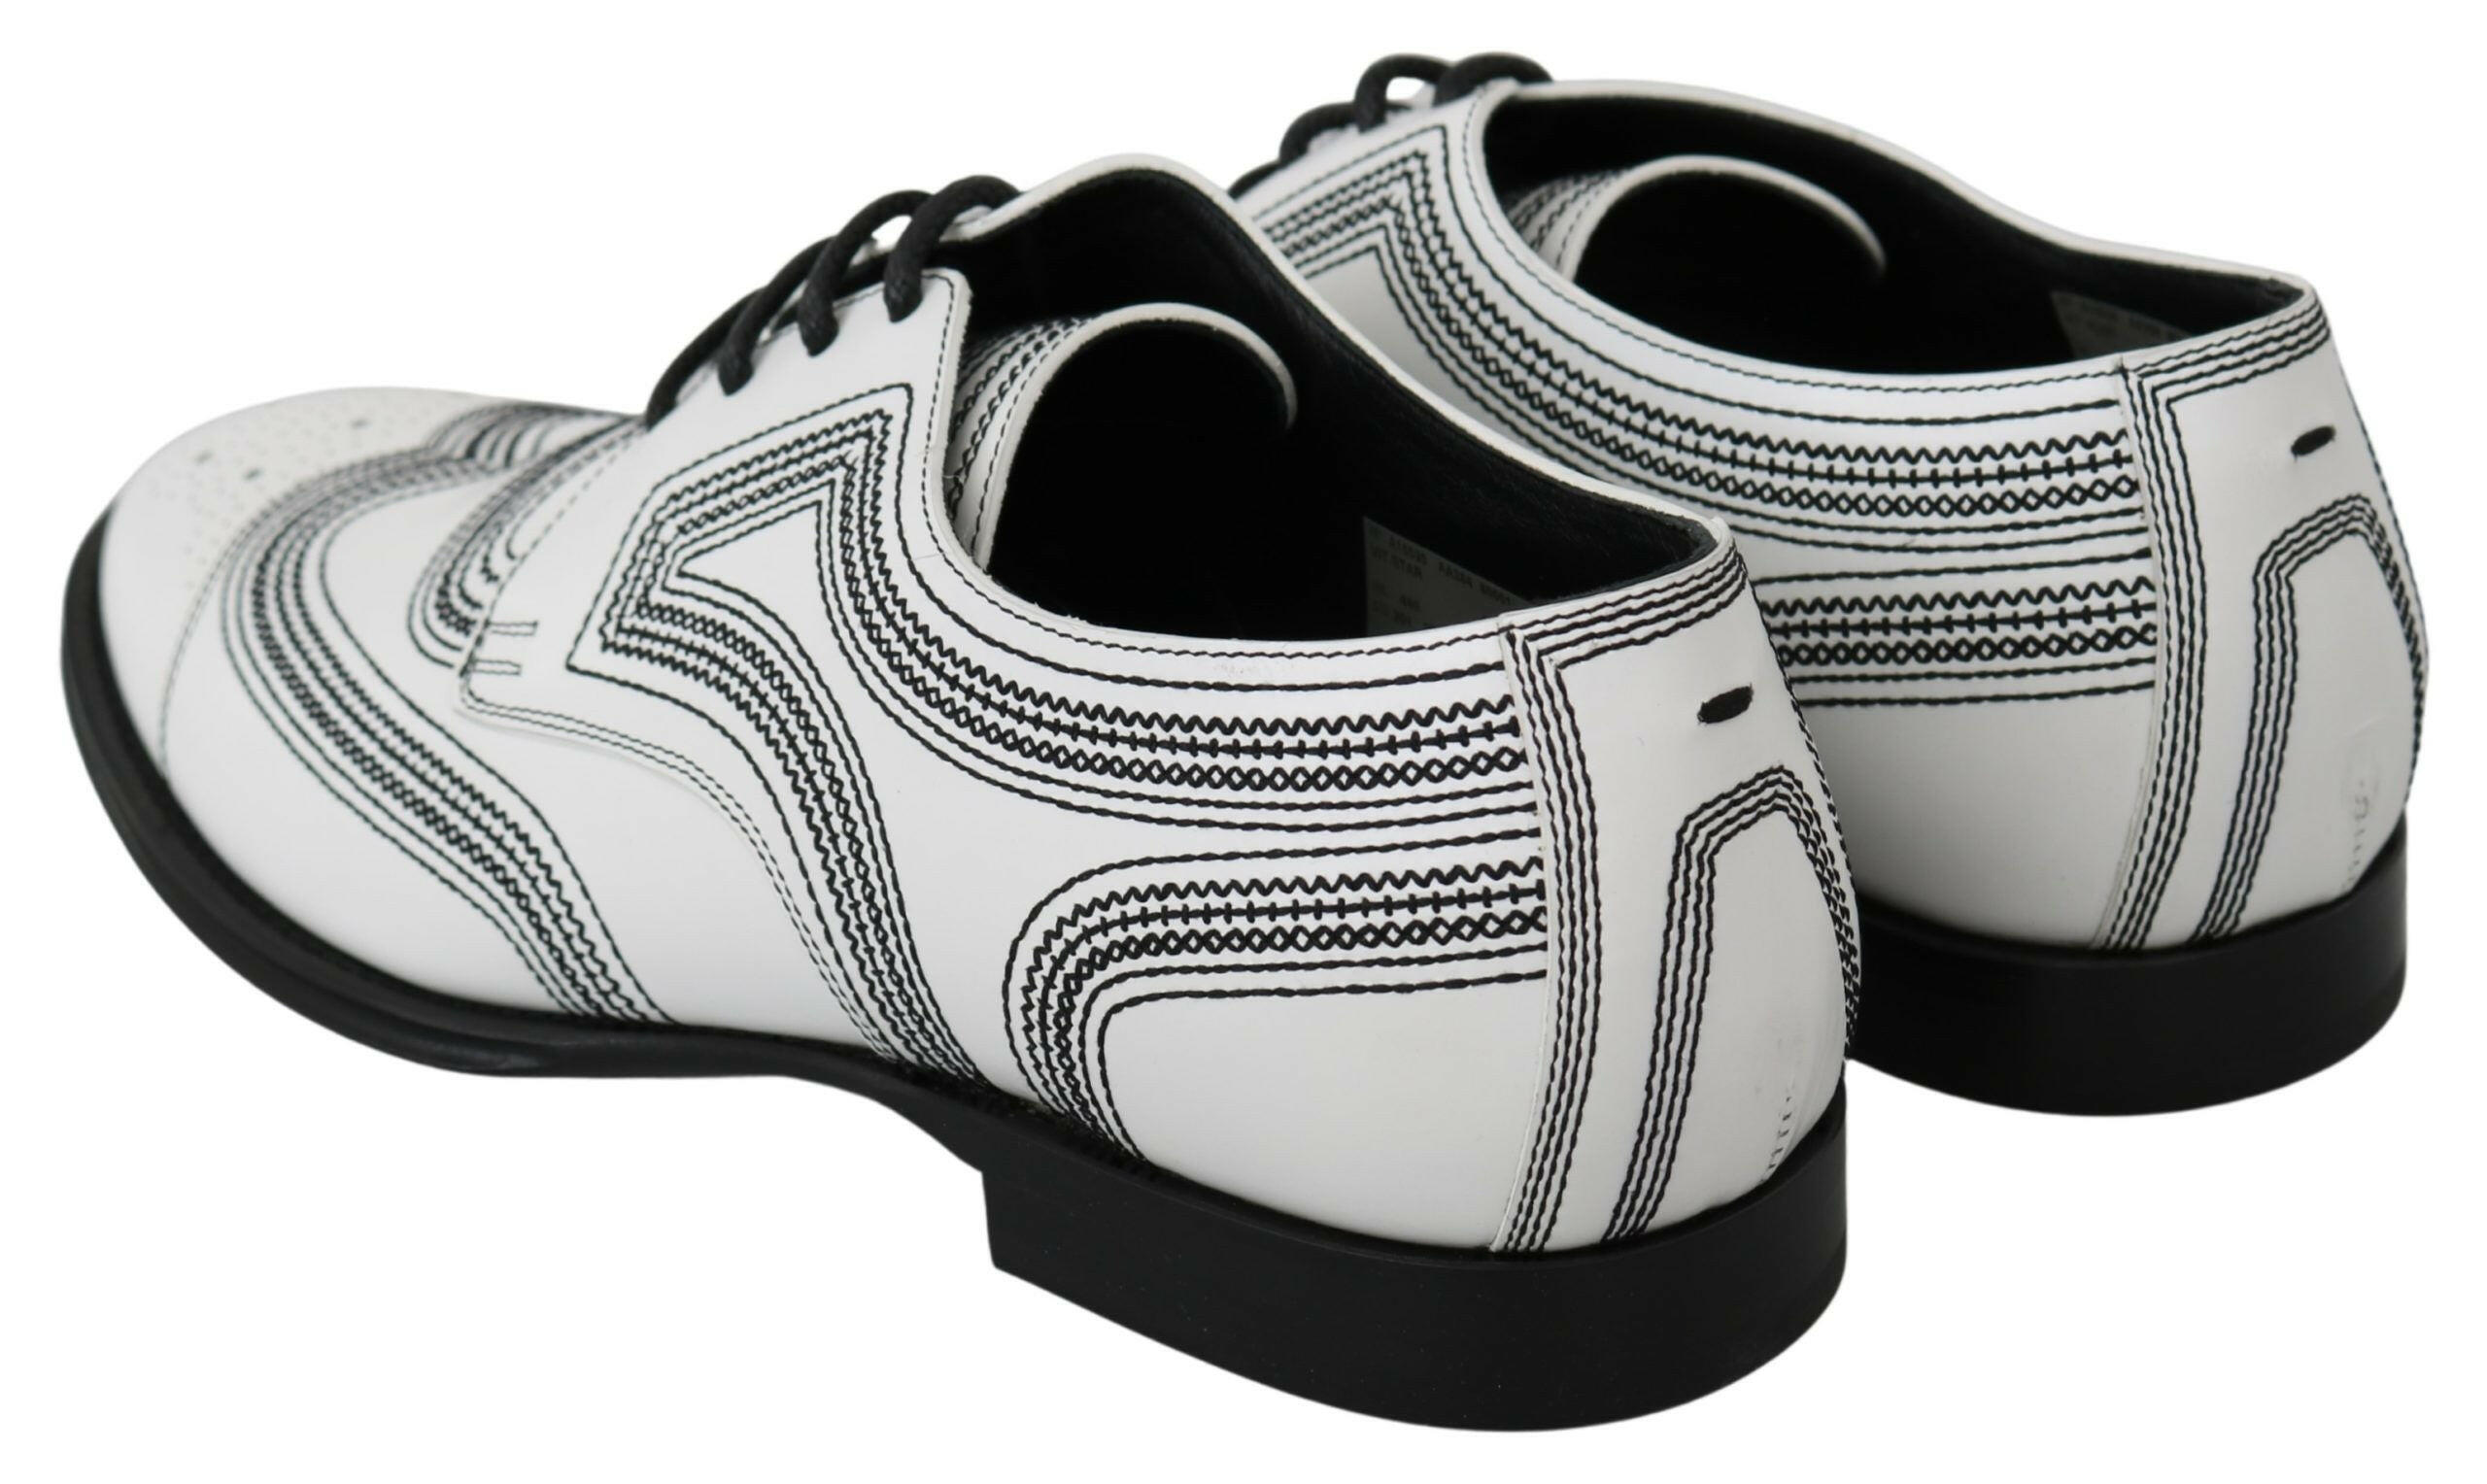 Dolce & Gabbana White Leather Derby Formal Black Lace Shoes - GENUINE AUTHENTIC BRAND LLC  